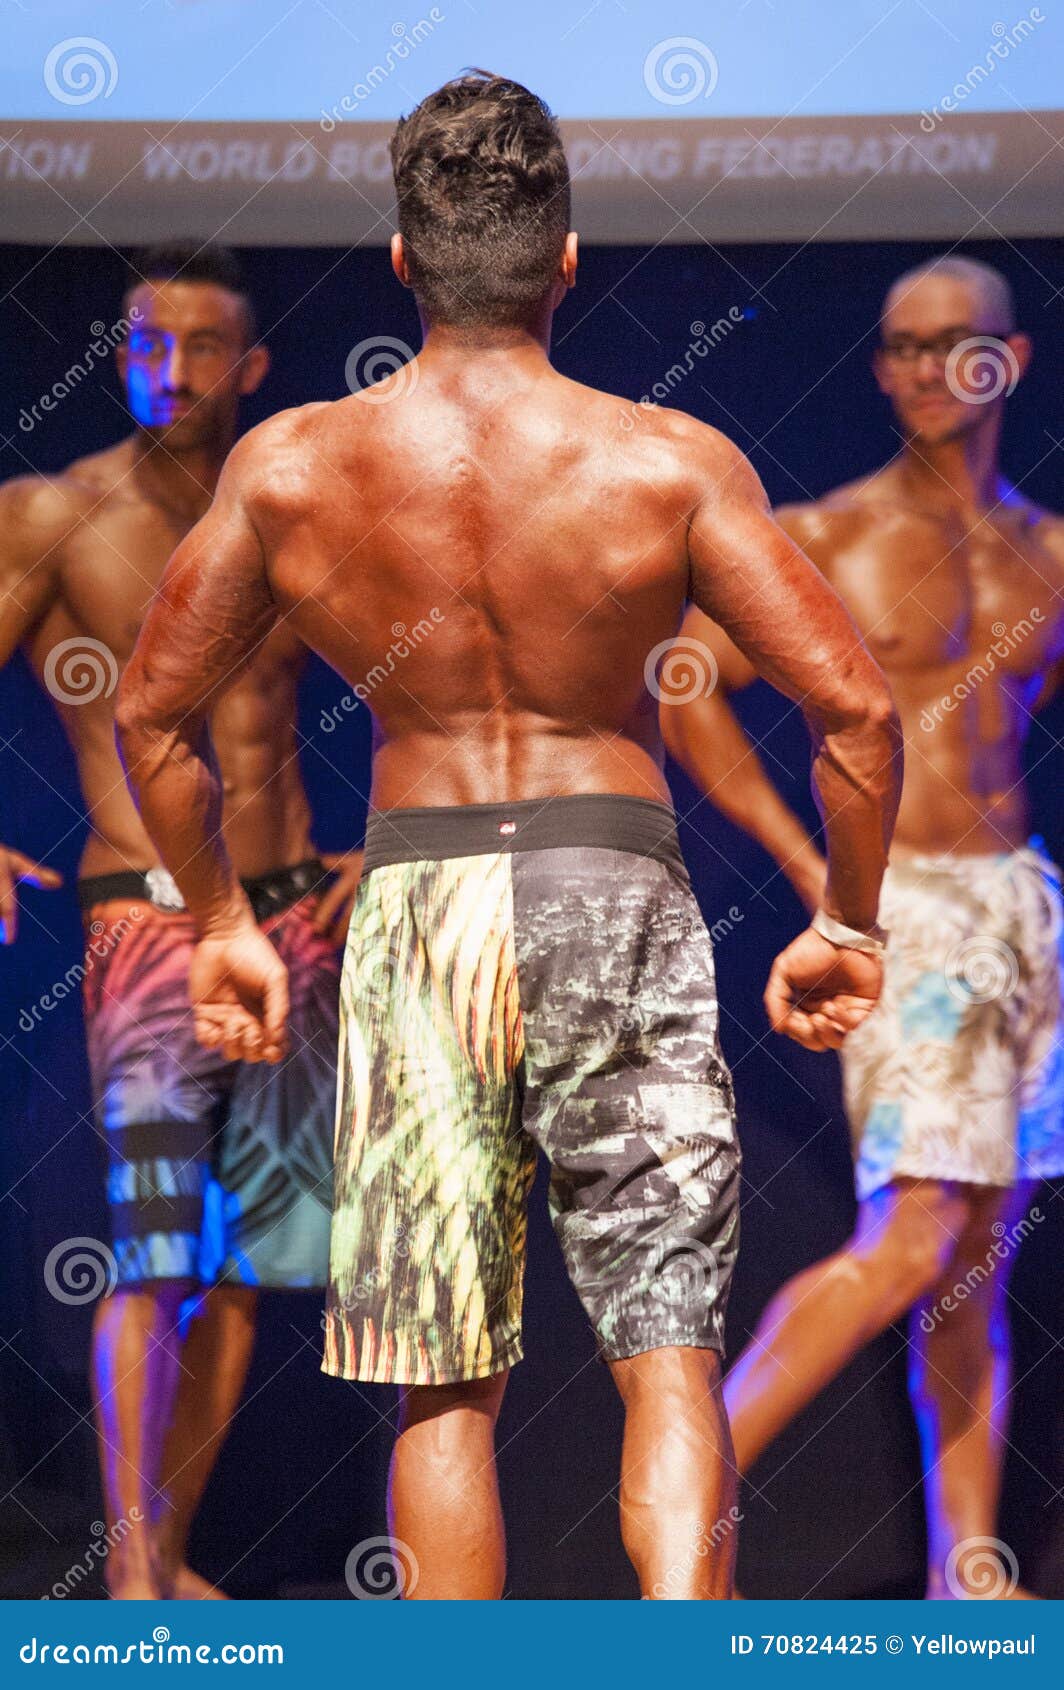 MAASTRICHT, THE NETHERLANDS - OCTOBER 25, 2015: Male Physique Model Ali  Dalili From Iran Shows His Best Back Pose At Championship On Stage At The  World Grandprix Bodybuilding And Fitness Of The